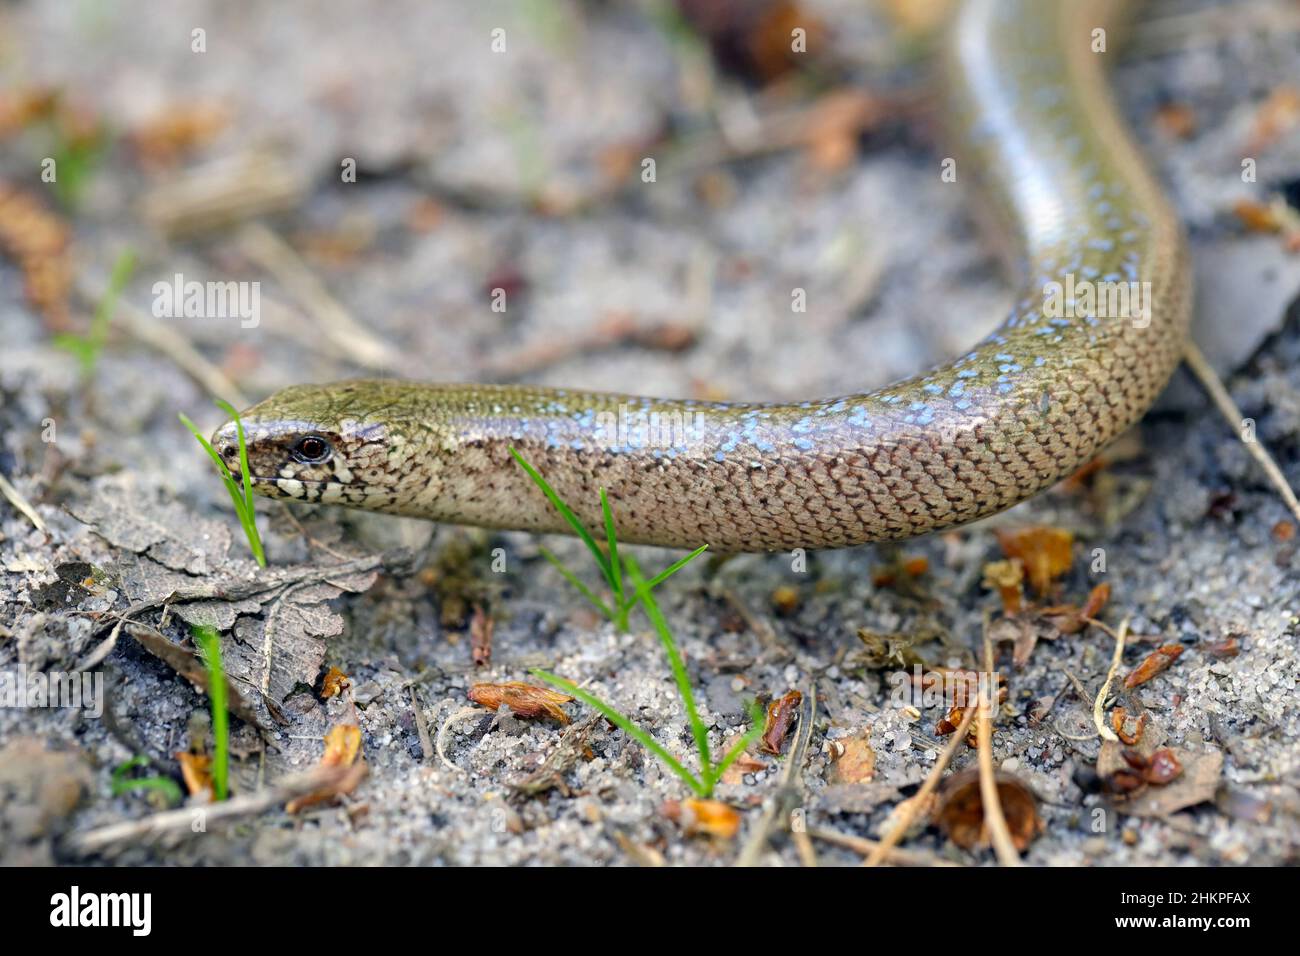 A juvenile Anguis fragilis, also known as a slow worm, slowworm, blind worm or glass lizard, and often mistaken for a snake. Stock Photo